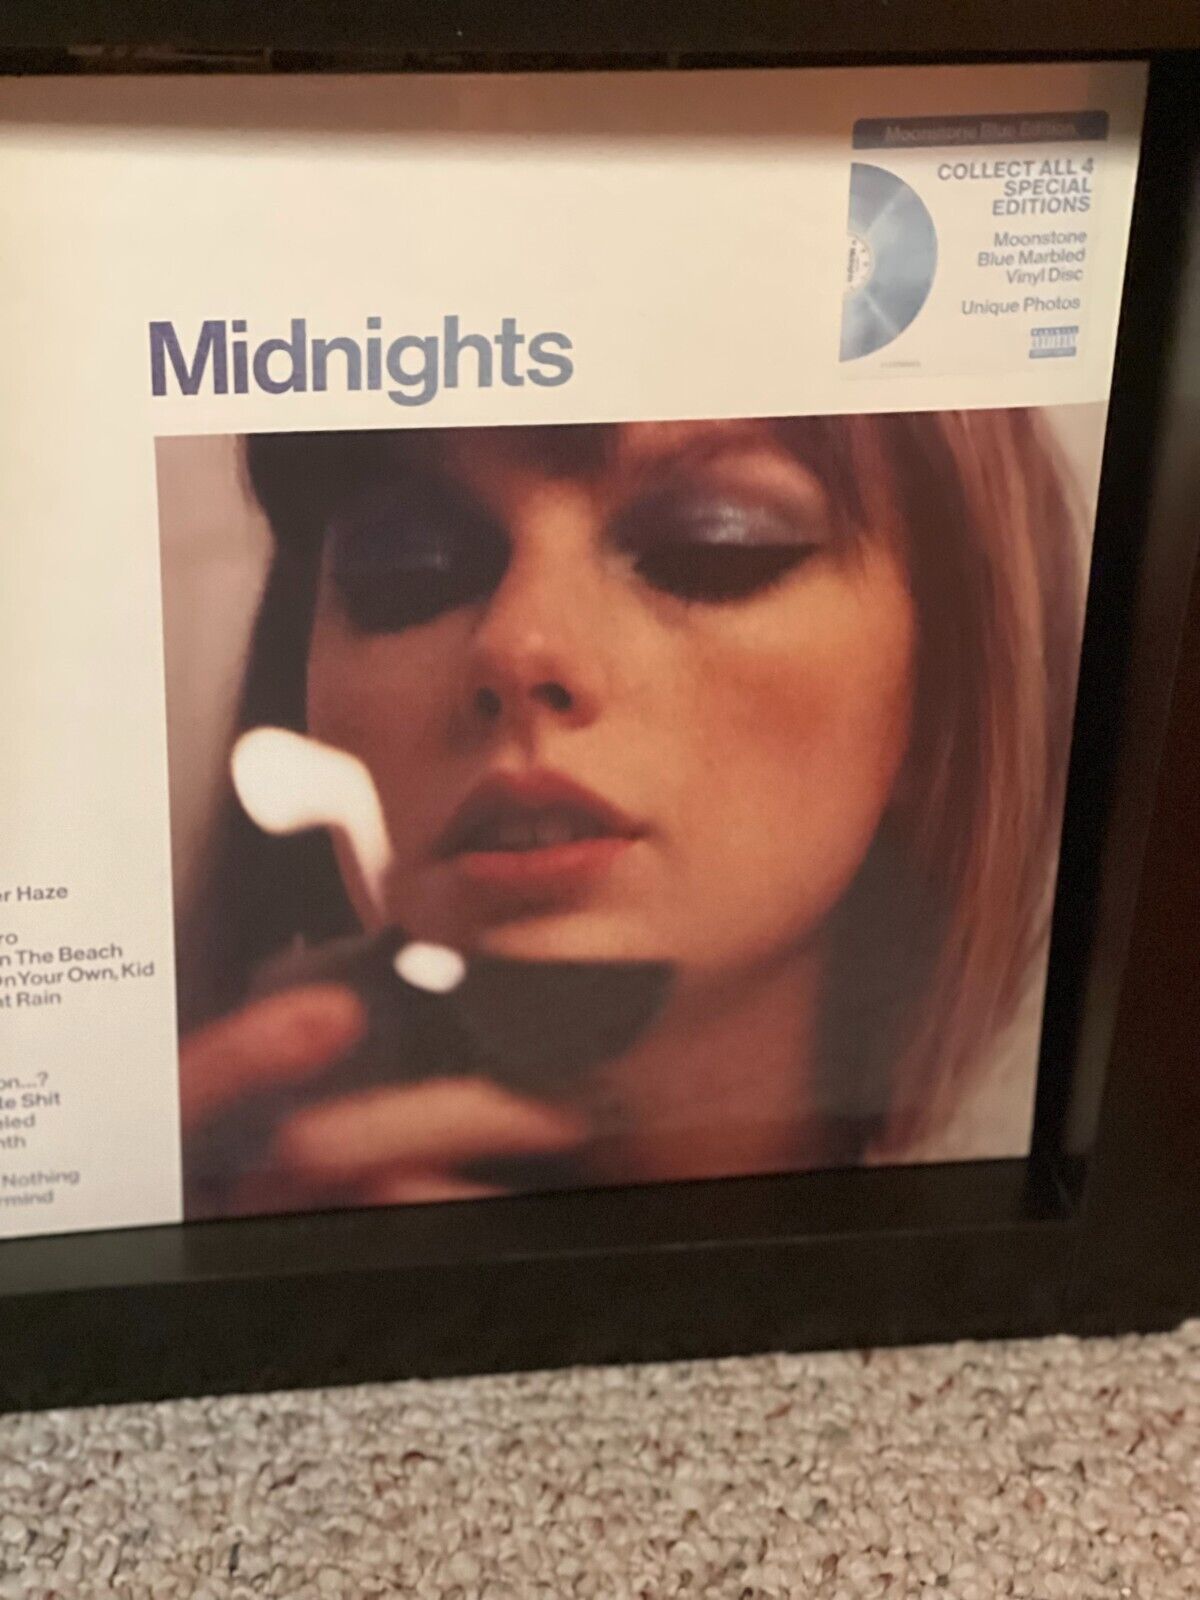 Title:Midnights (Moonstone Blue Marbled) SEALED:Taylor Swift Complete Record Vinyl Collection You Pick! Rare! Most SEALED!! TS